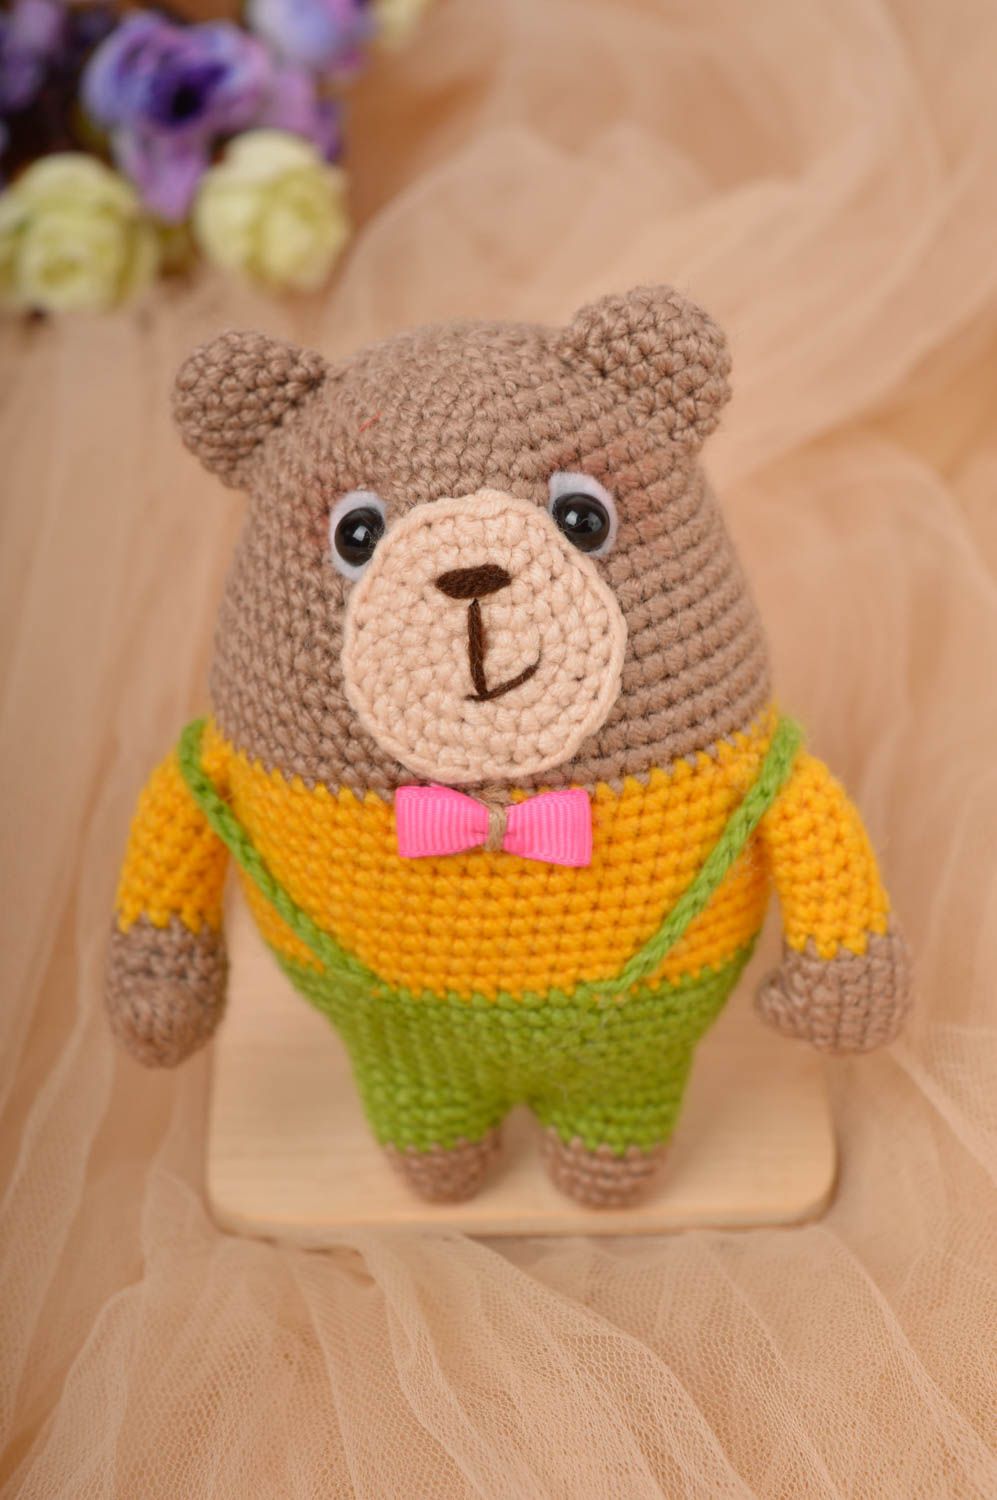 Handmade crocheted stuffed toy soft toys for children hand-crocheted toys photo 1